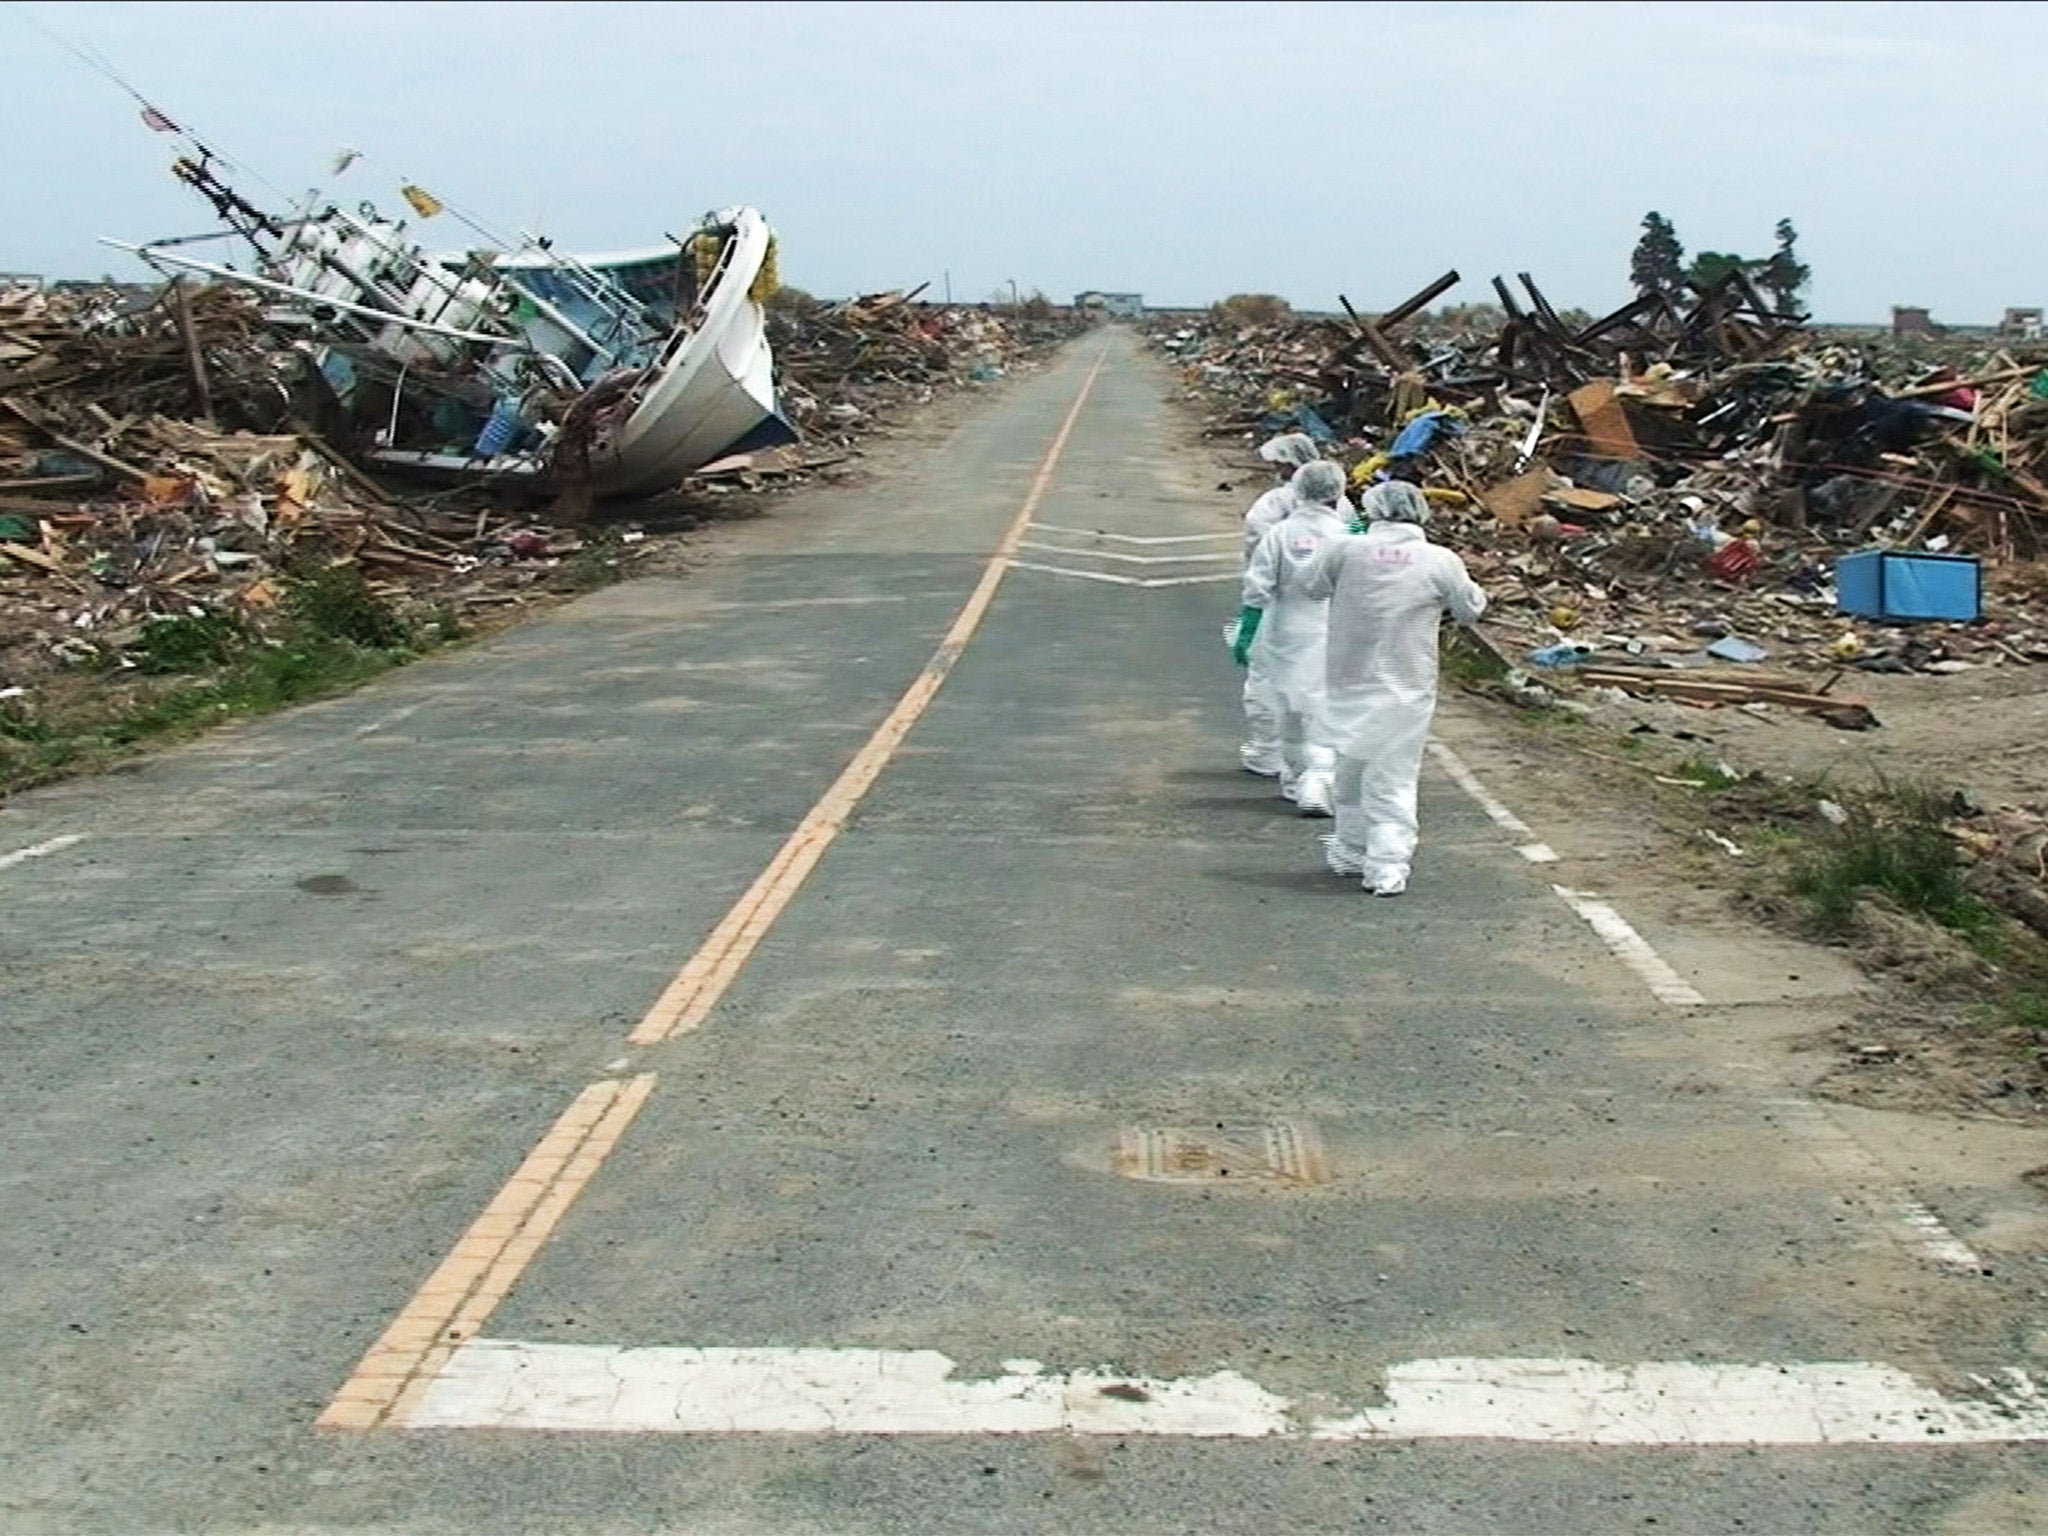 In a scene from ‘Nuclear Nation’, residents of Futaba return to their town for the first time after the nuclear meltdown